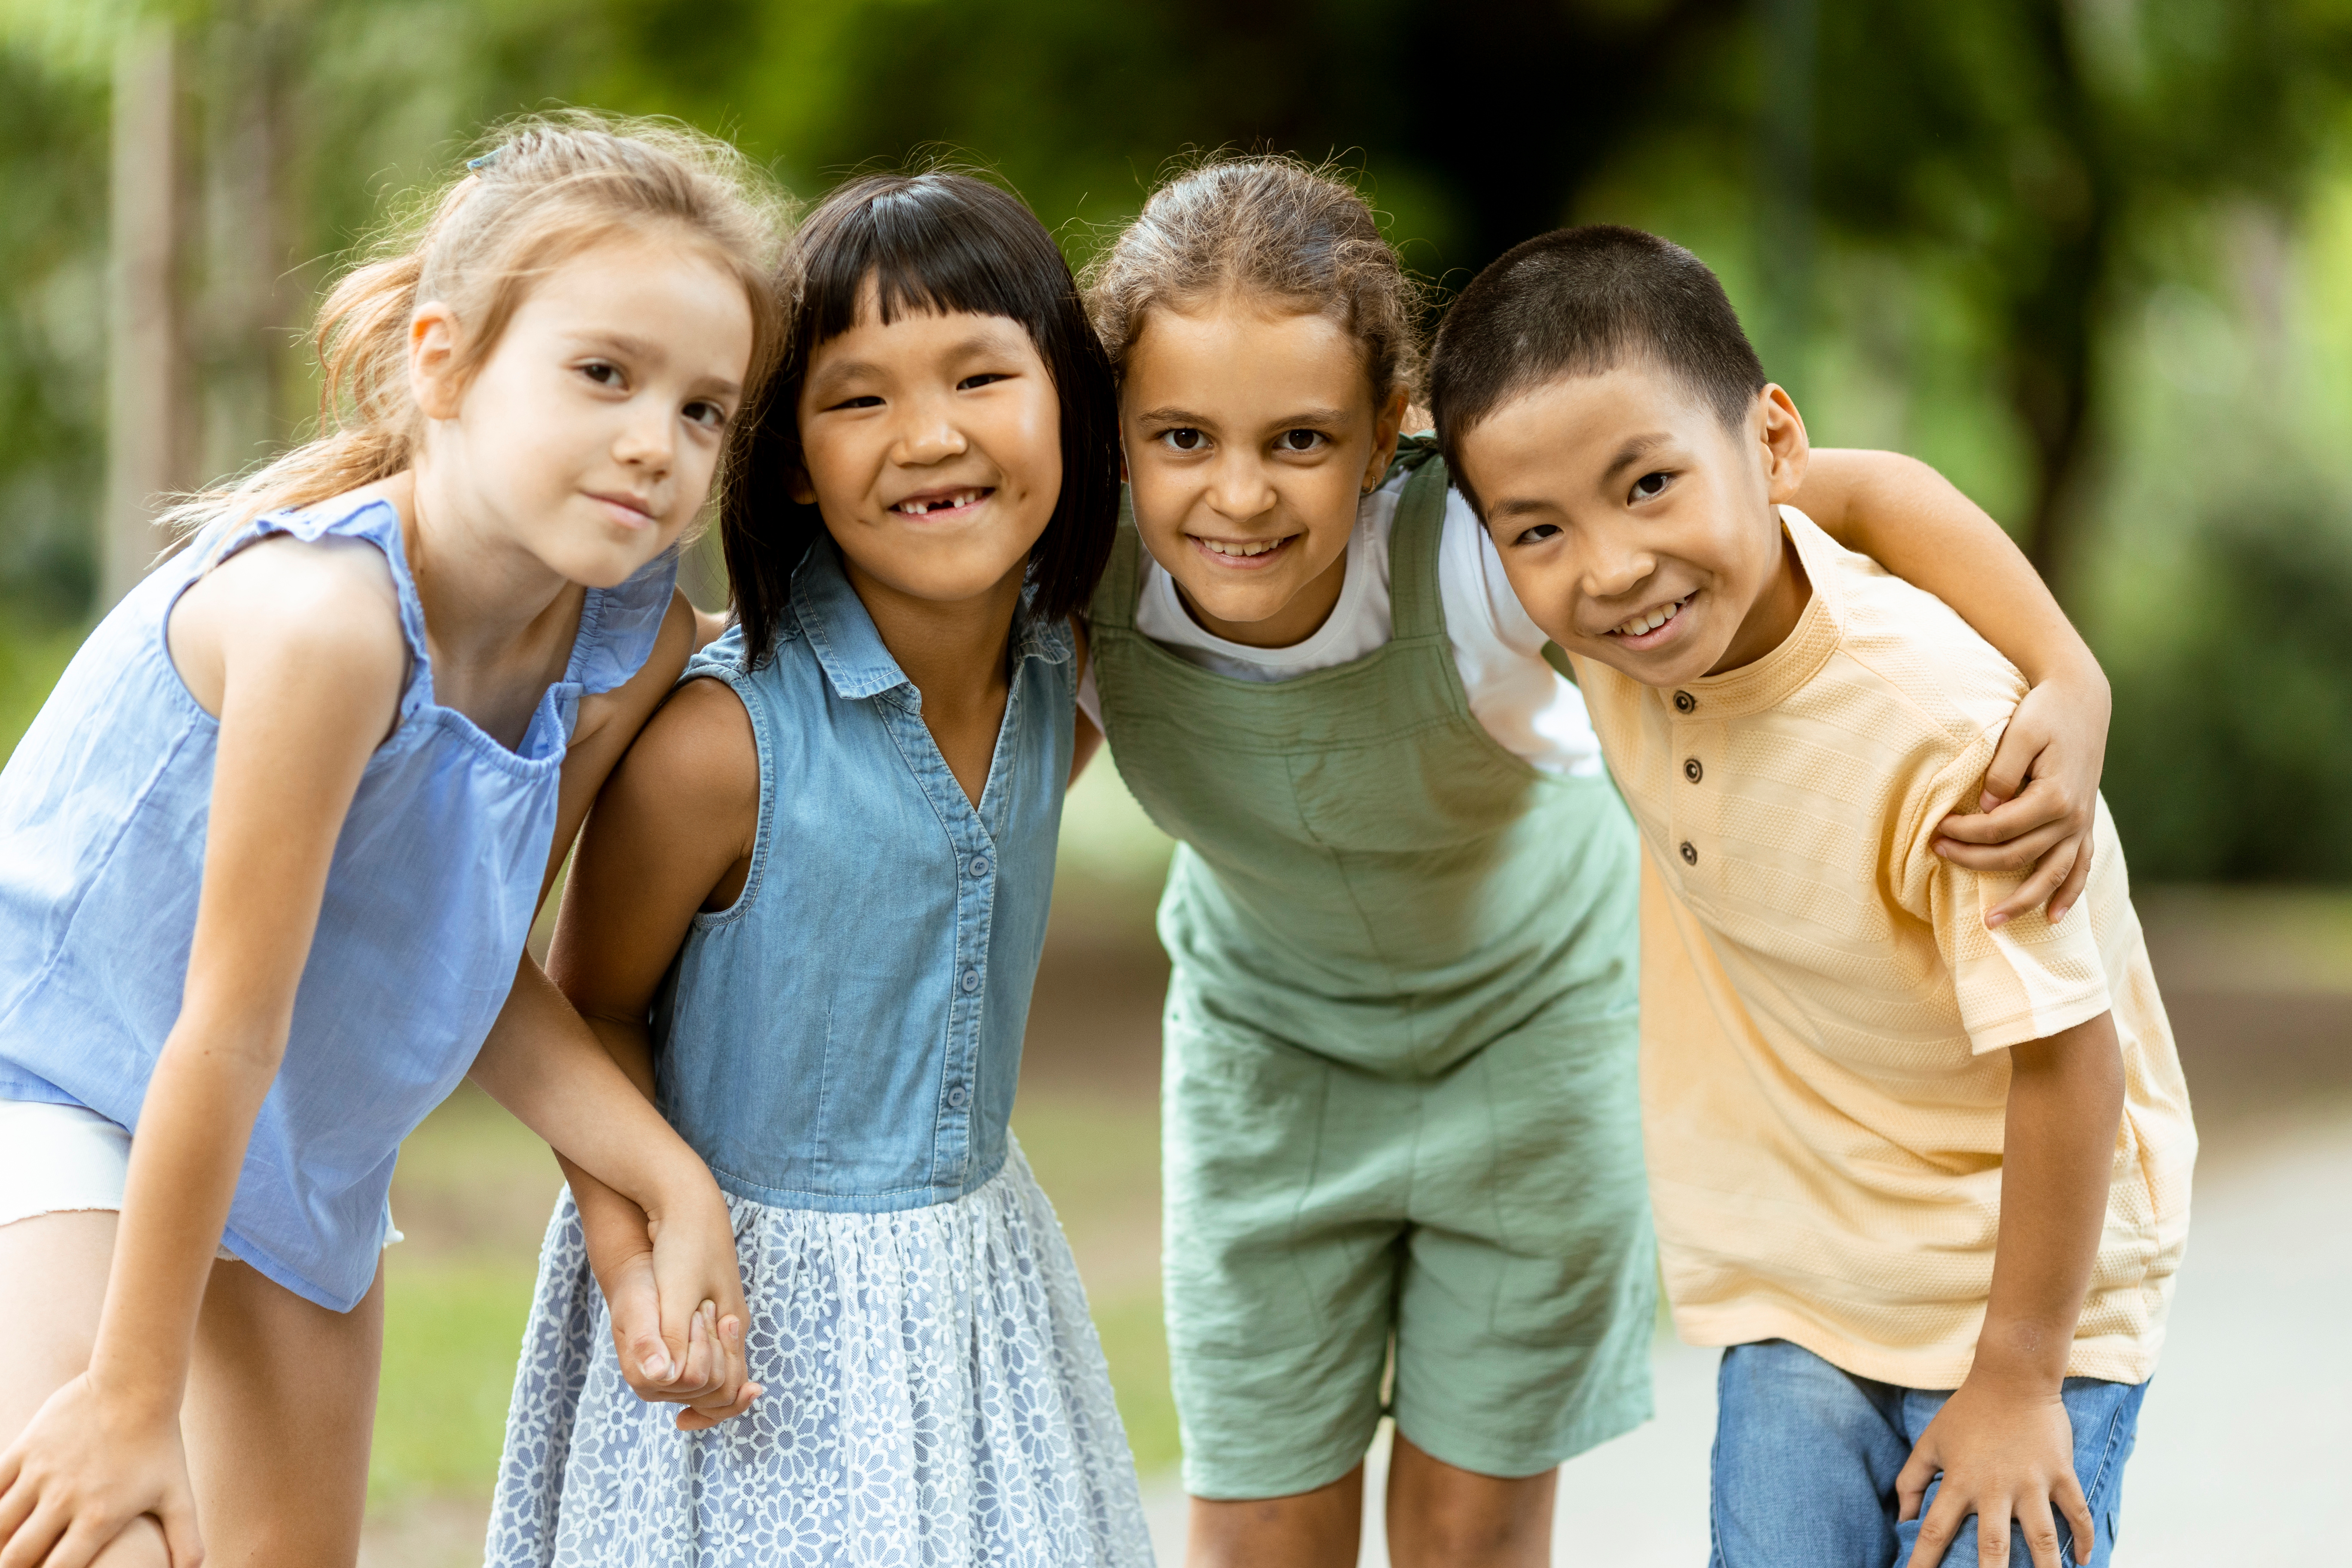 A group of children stand together outside and smile at the camera